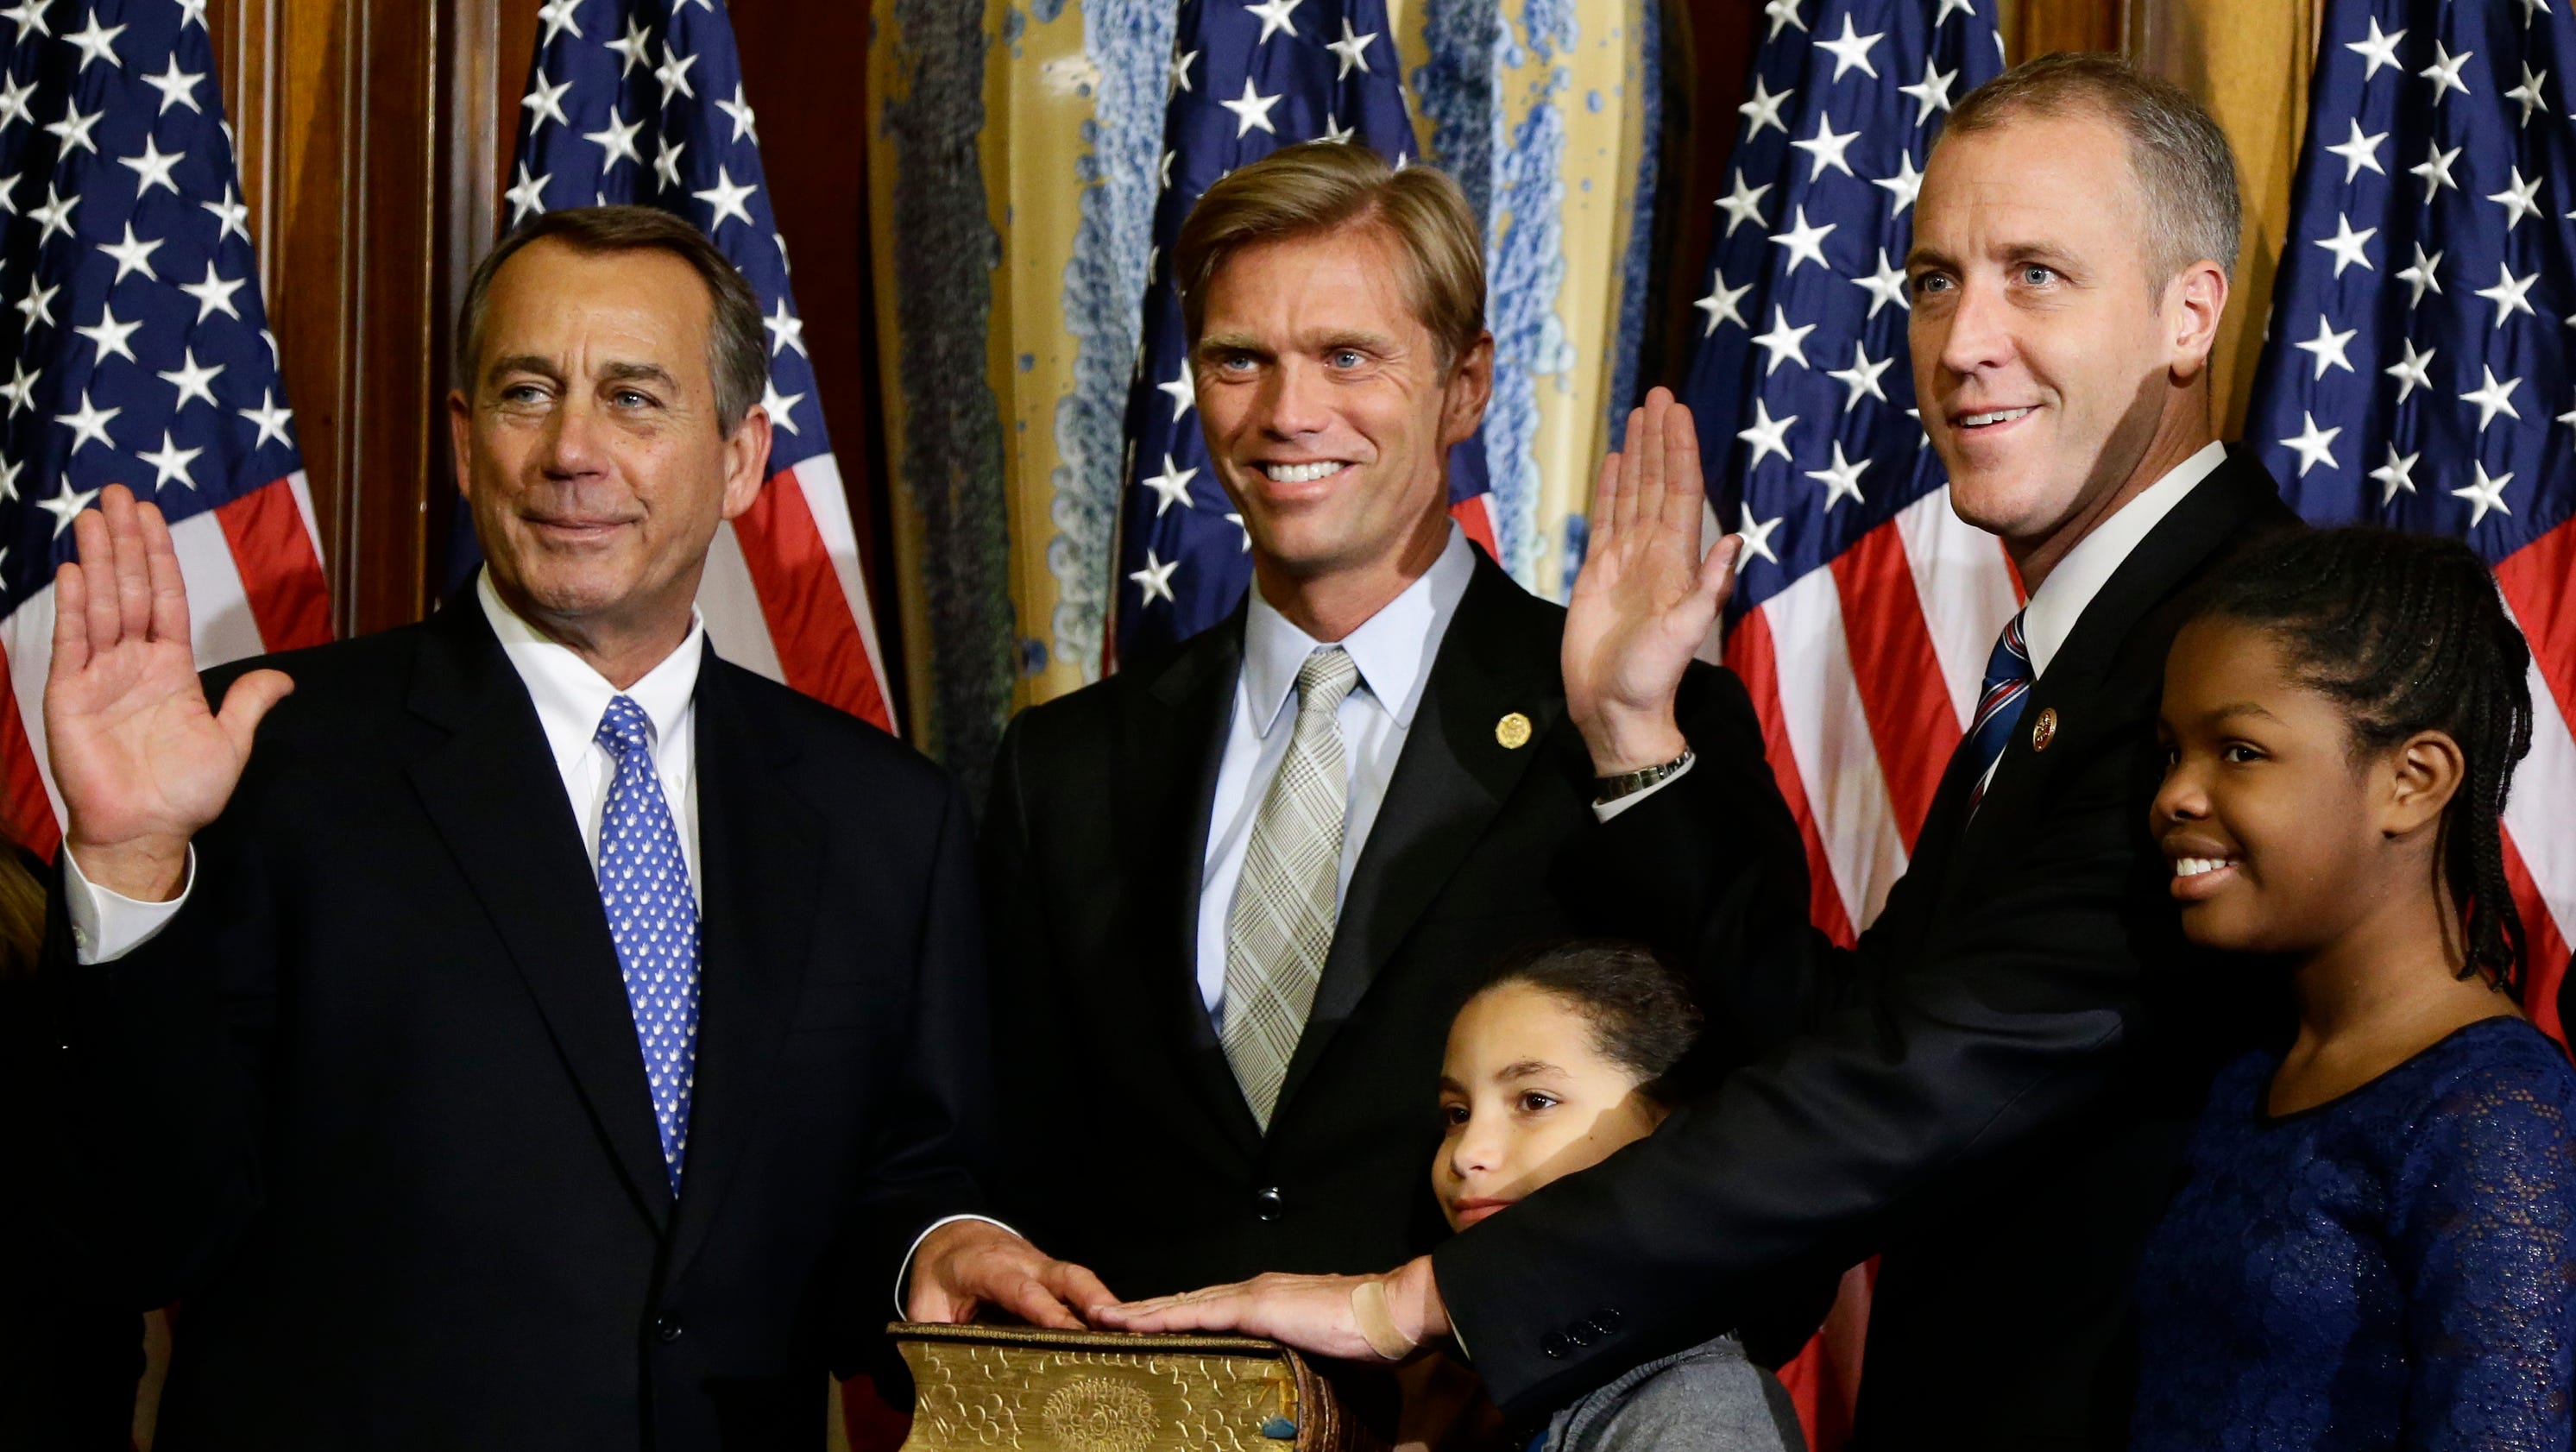 Gay congressman from New York to marry partner